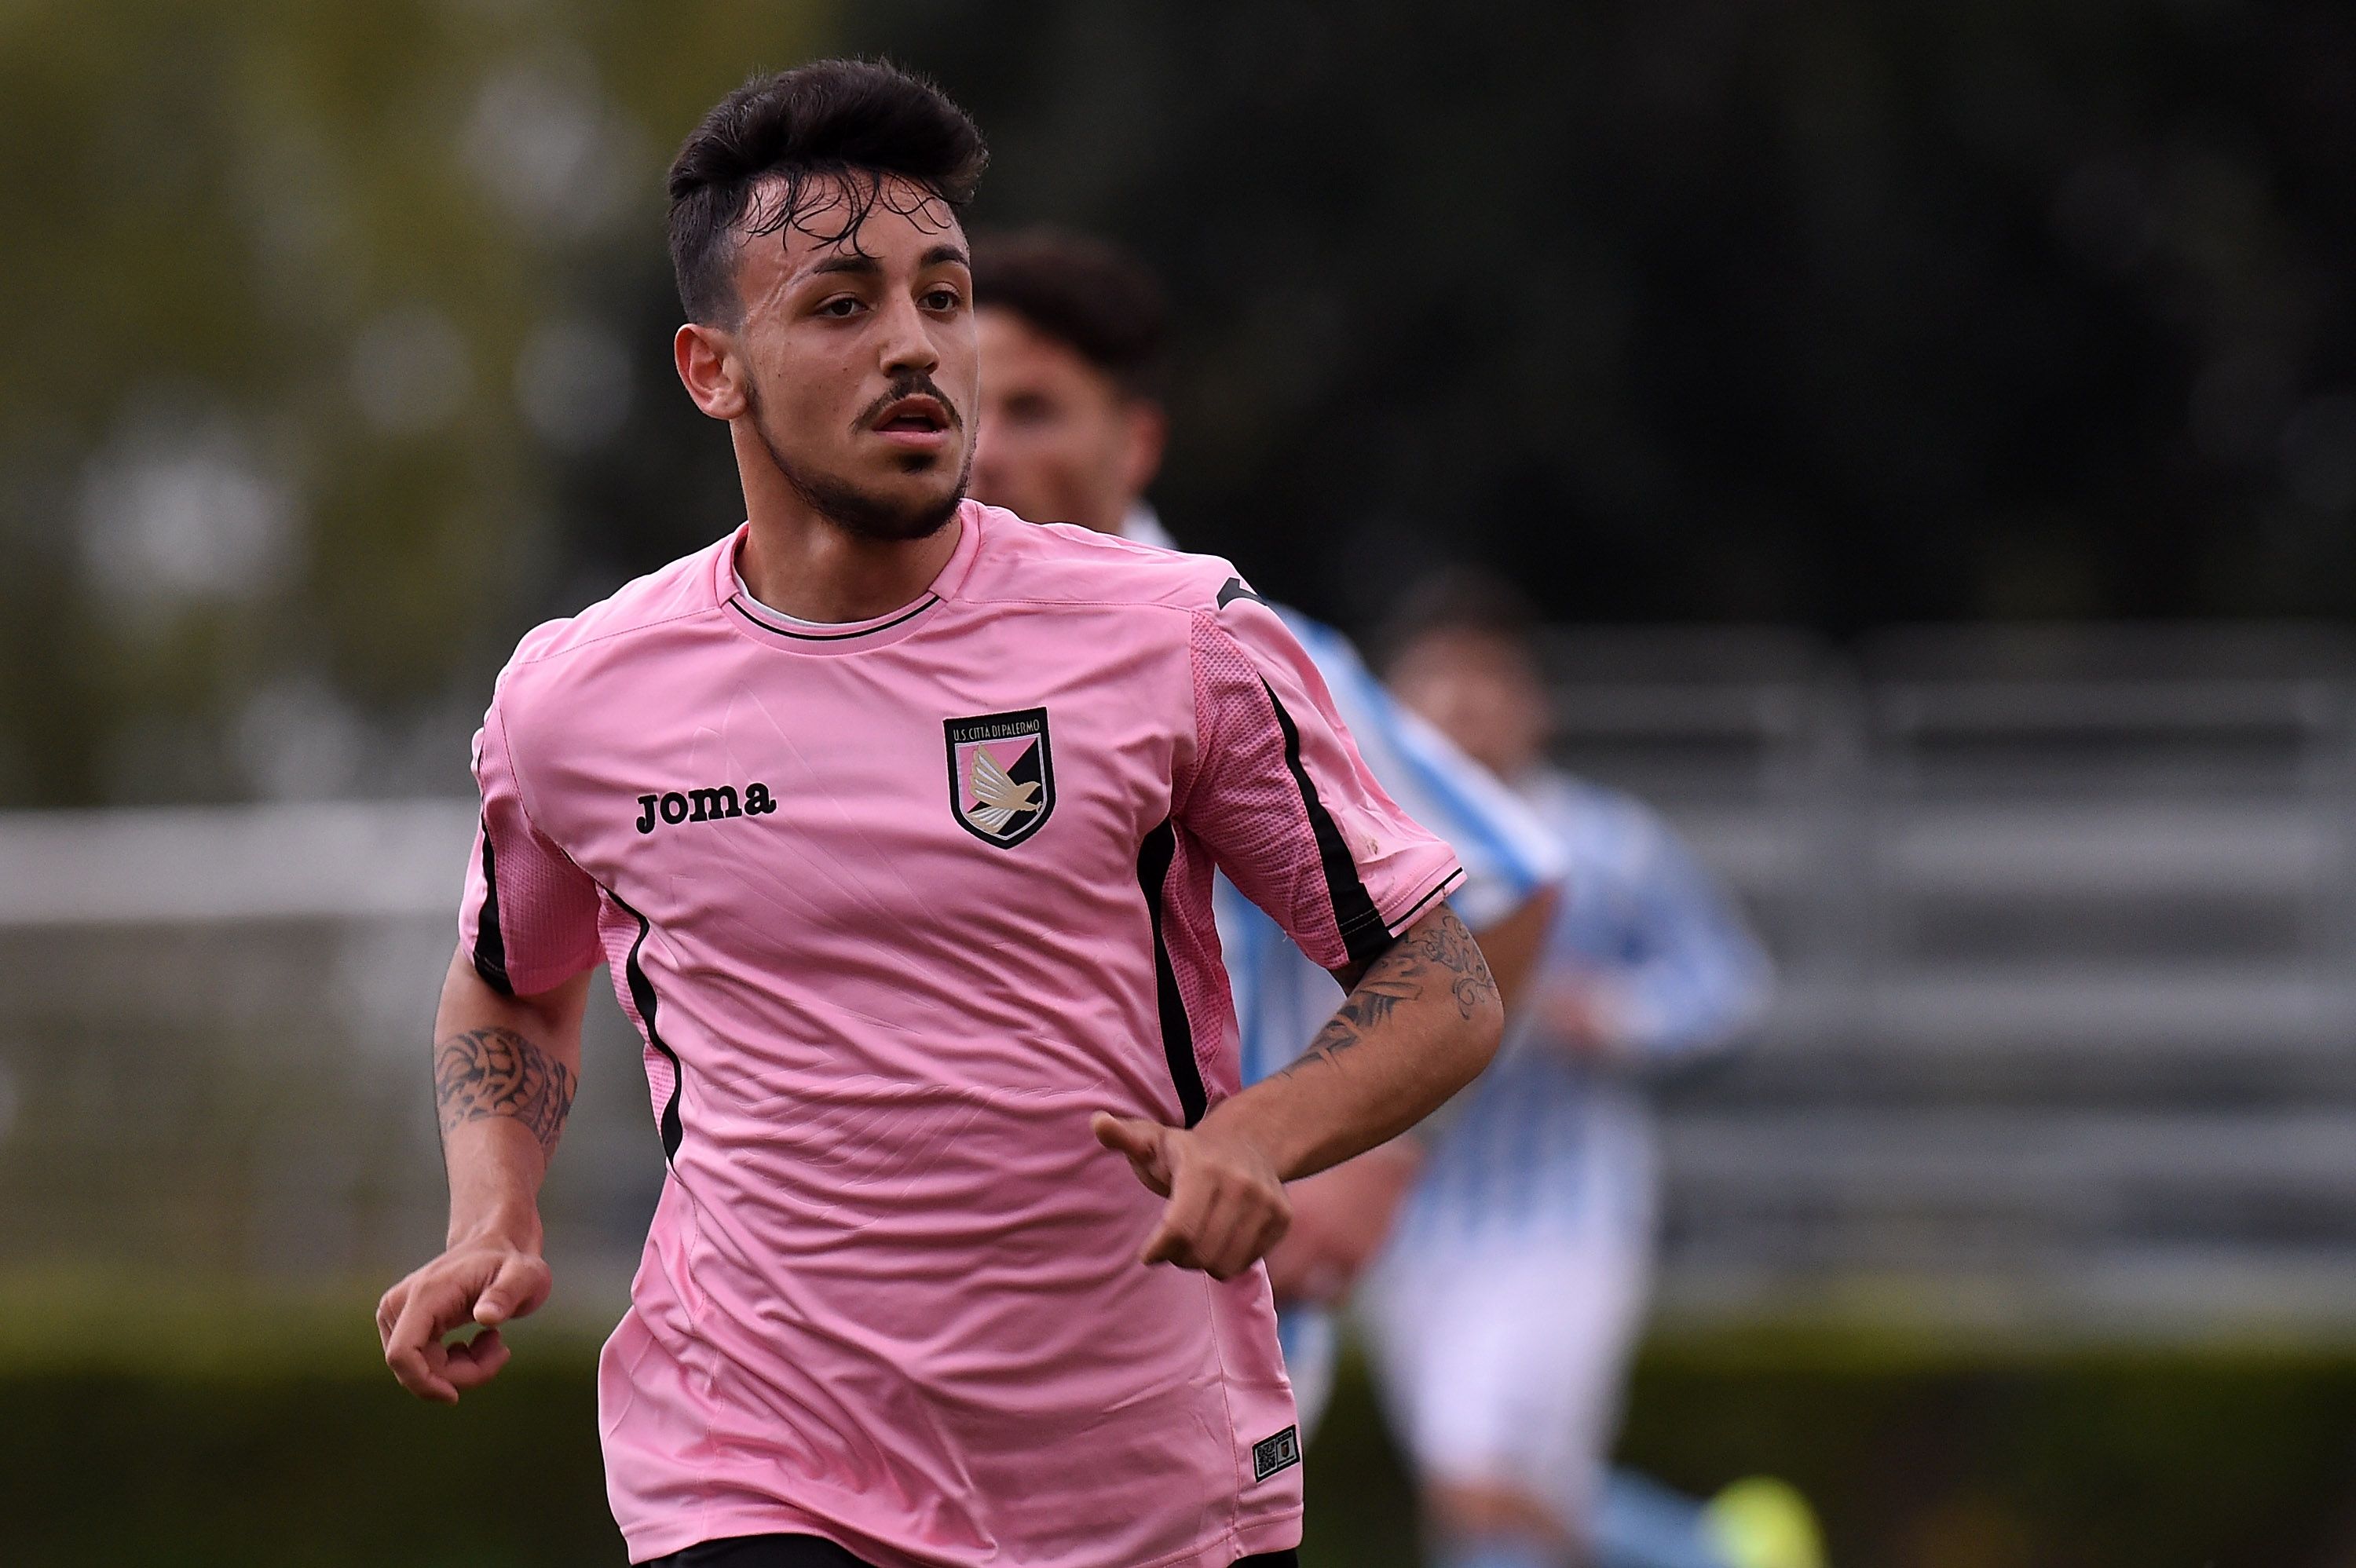 March 16, 2016: Accursio Bentivegna of Palermo in action during a test match between US Citta' di Palermo and Parmonval.